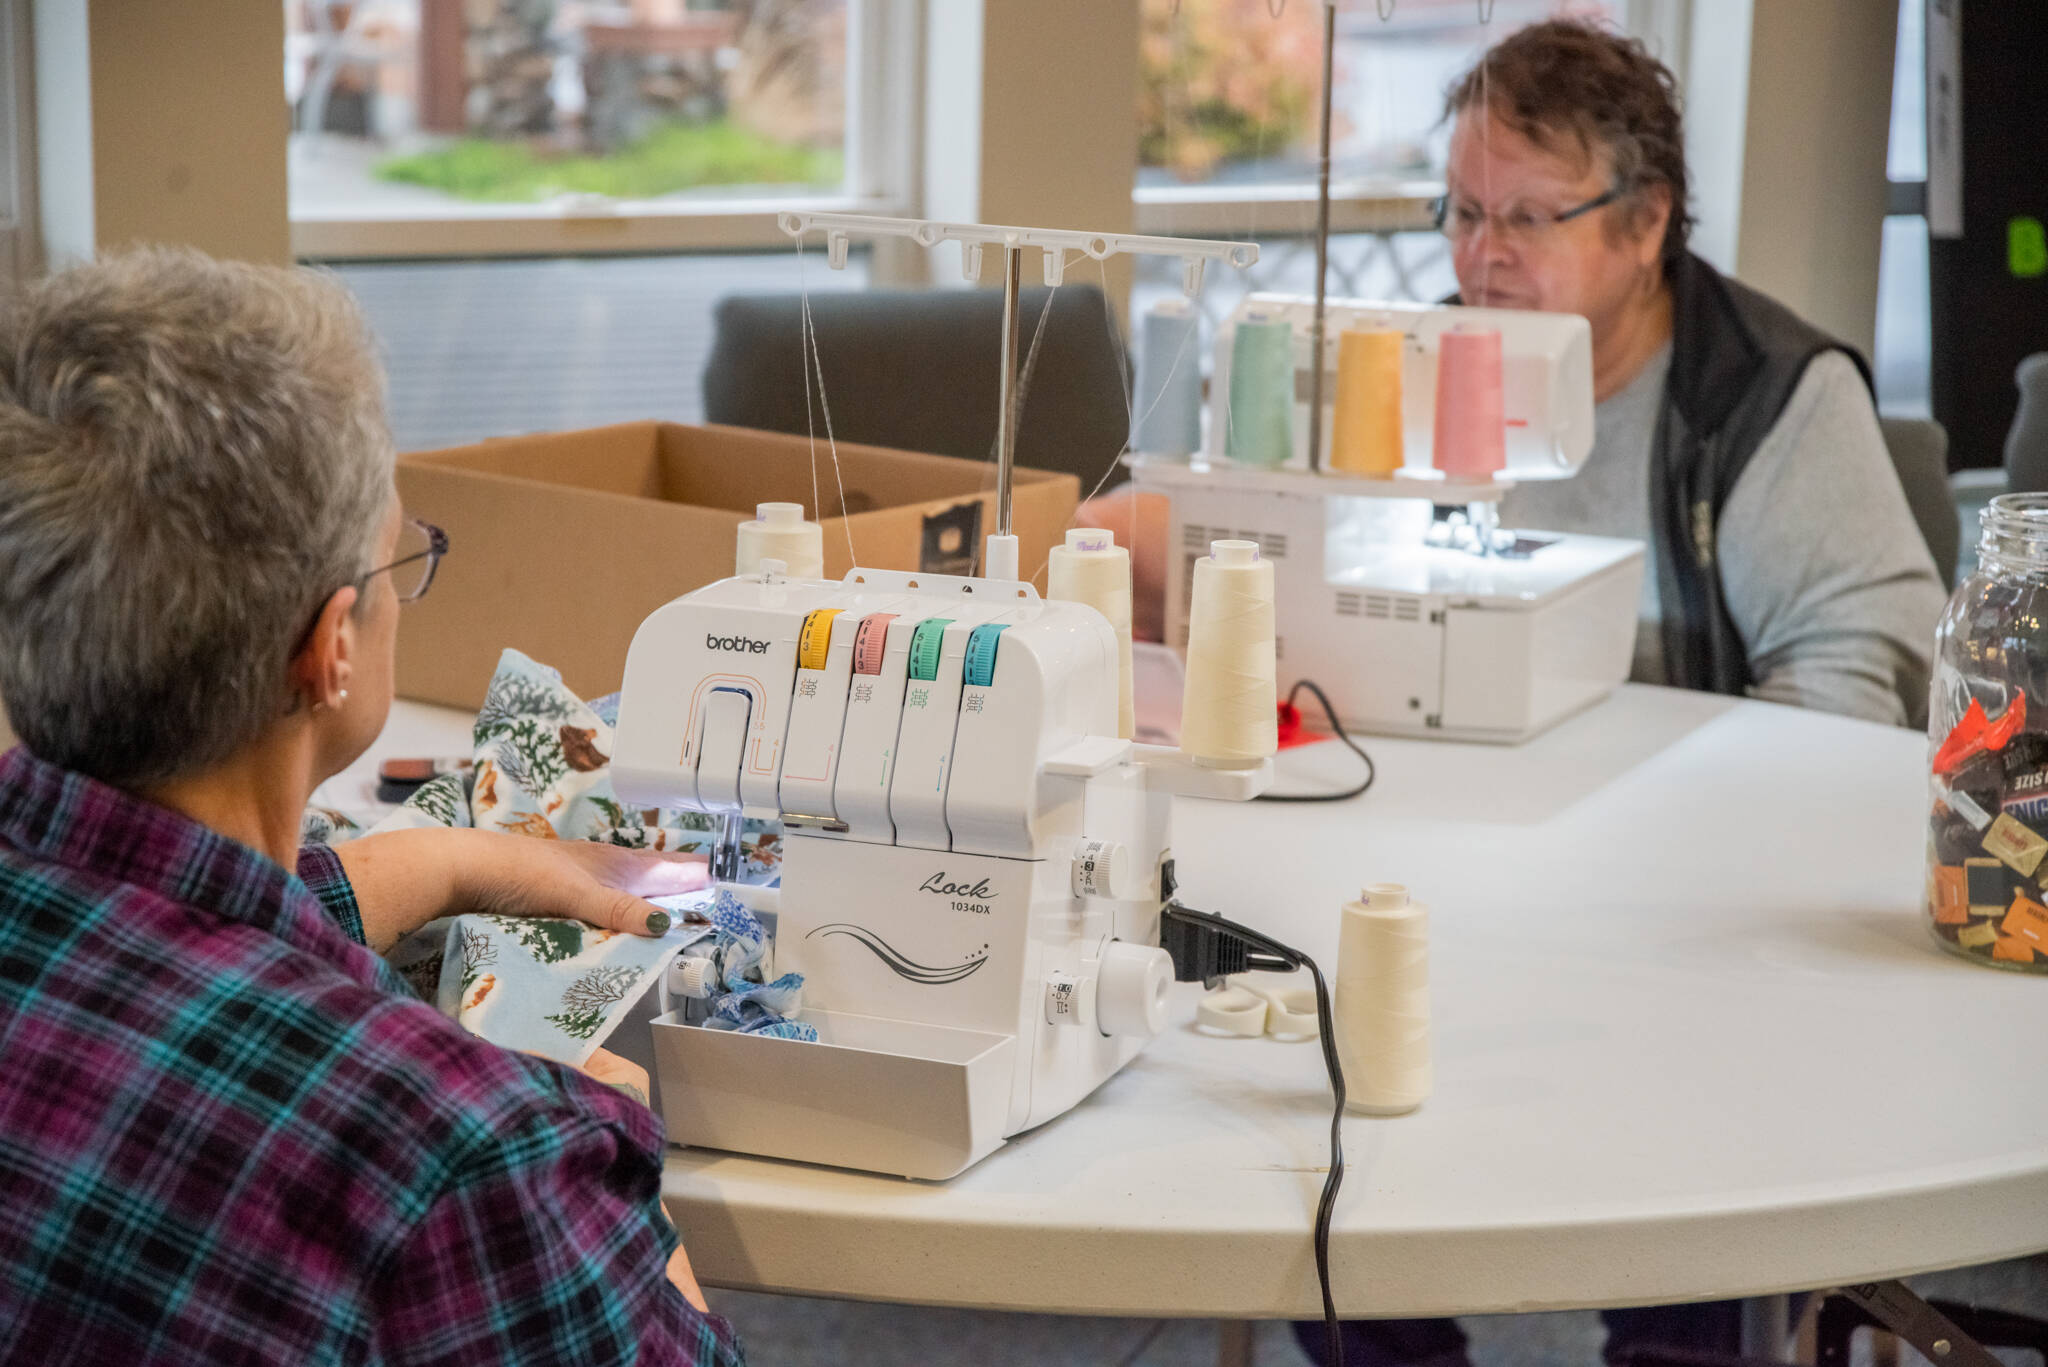 Emily Matthiessen/Sequim Gazette photos
Members of the Sequim Serger Squad, Gail Schwab (left) and Gerri Frick, finish blankets for children in need on their serger machines. “I don’t always get a chance to use a hobby in a way to help the community,” Frick said. “It feels good to do that.”